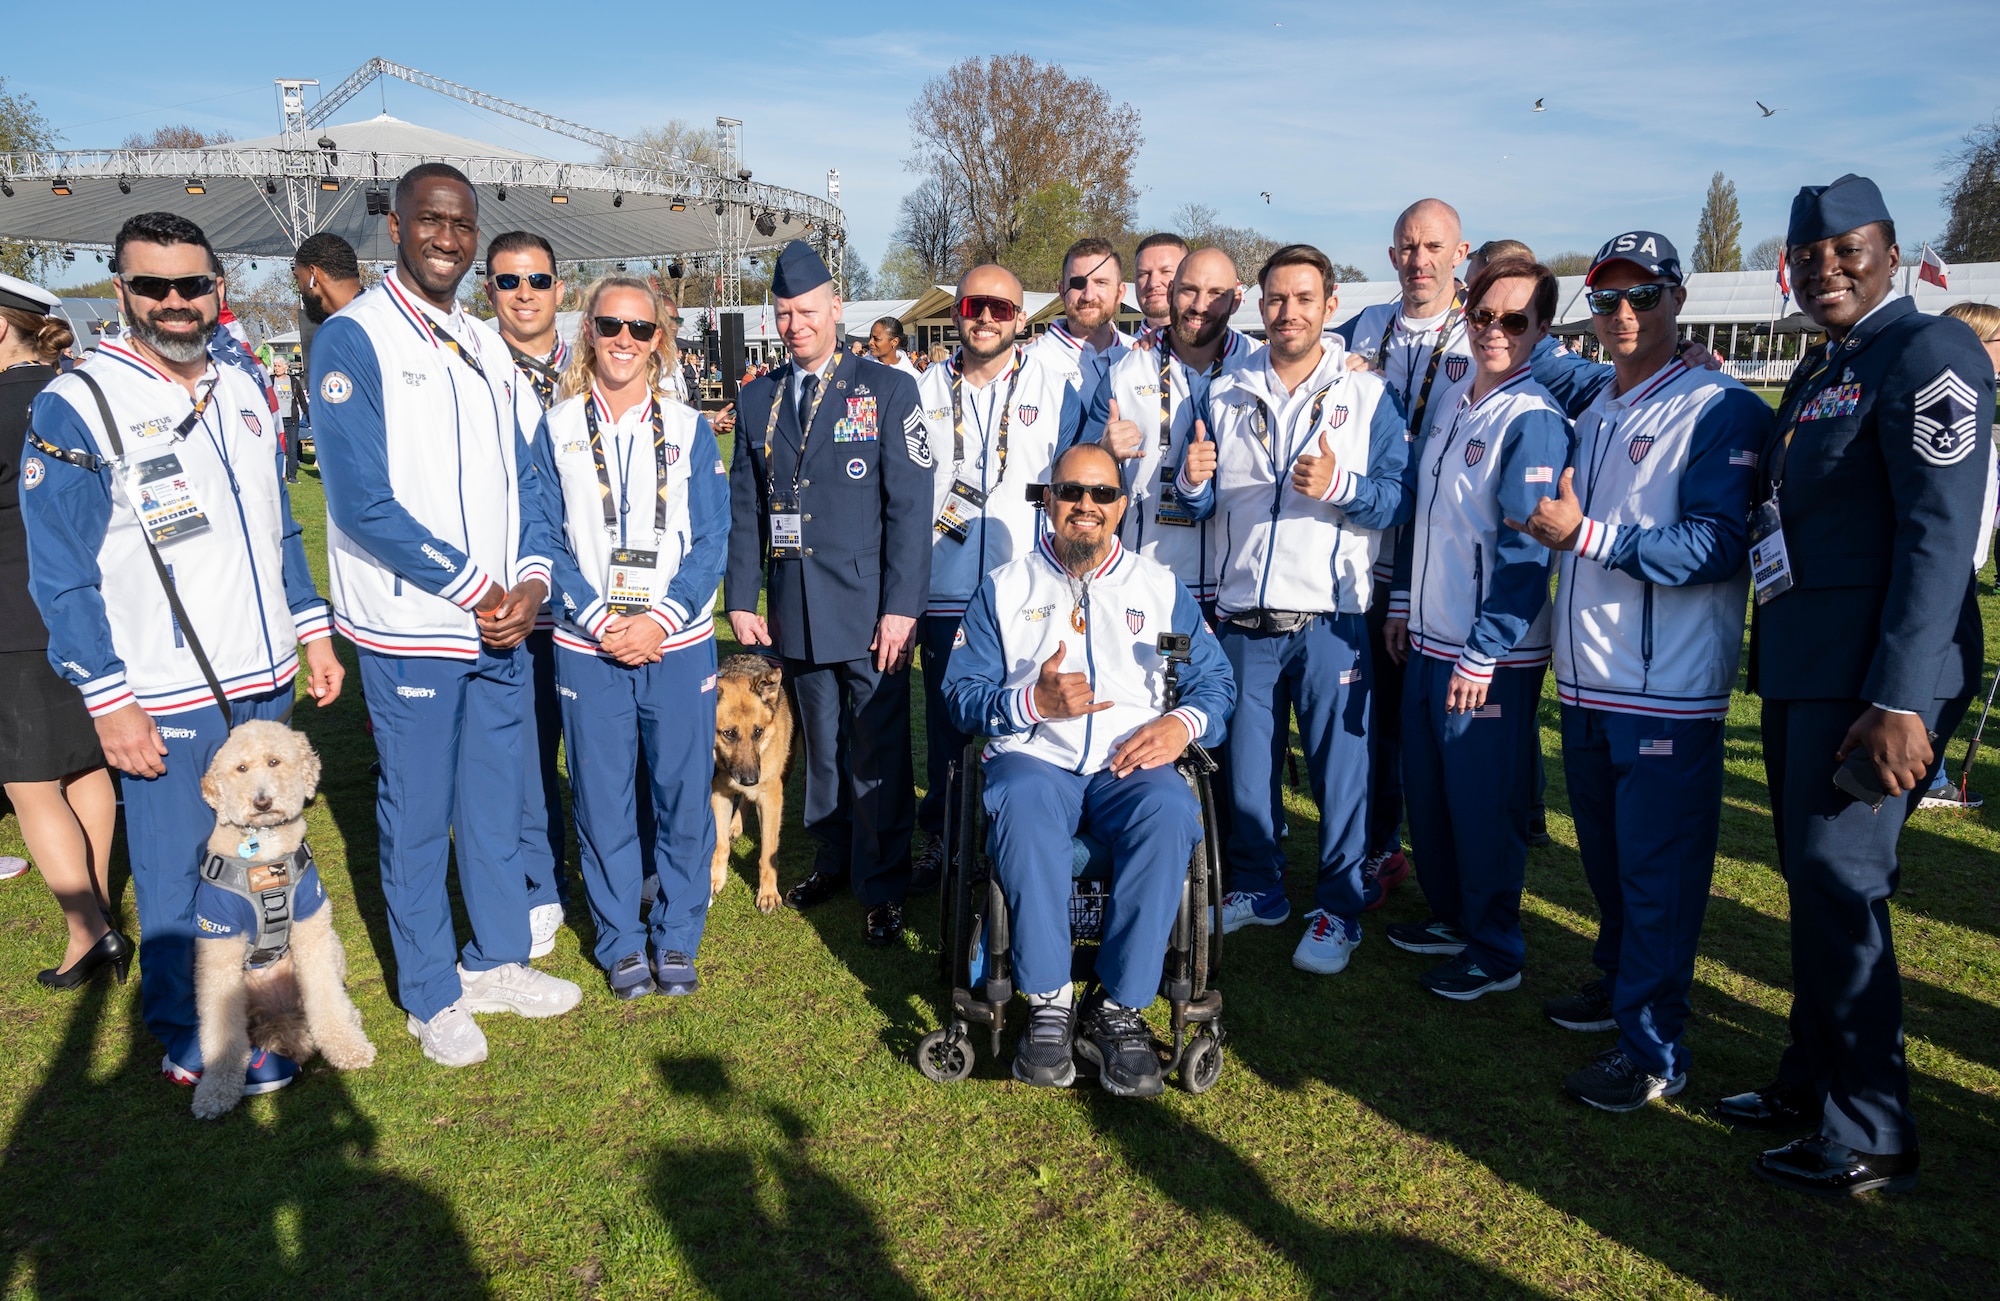 USAFE-AFAFRICA command chief visits Invictus Games 2022